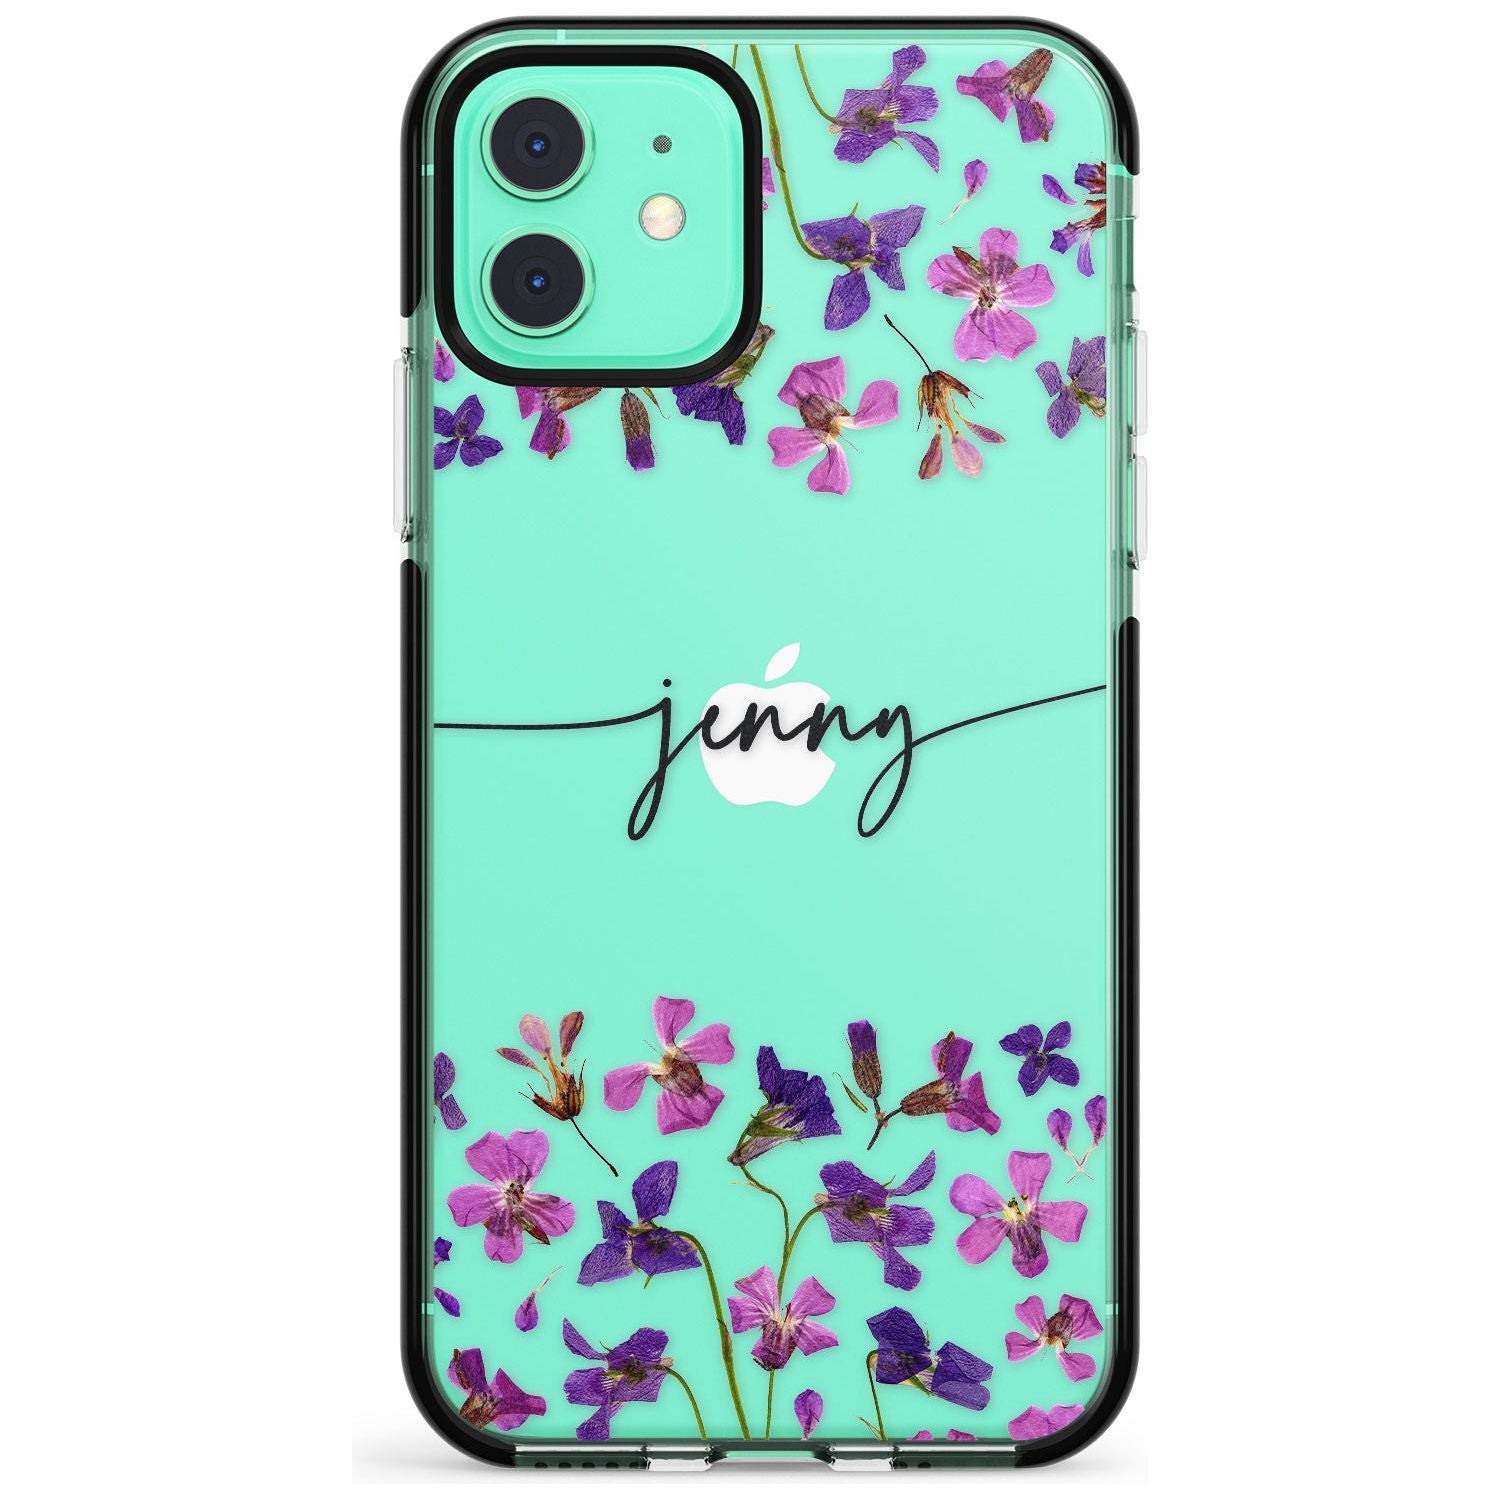 Custom Violet Flowers Pink Fade Impact Phone Case for iPhone 11 Pro Max